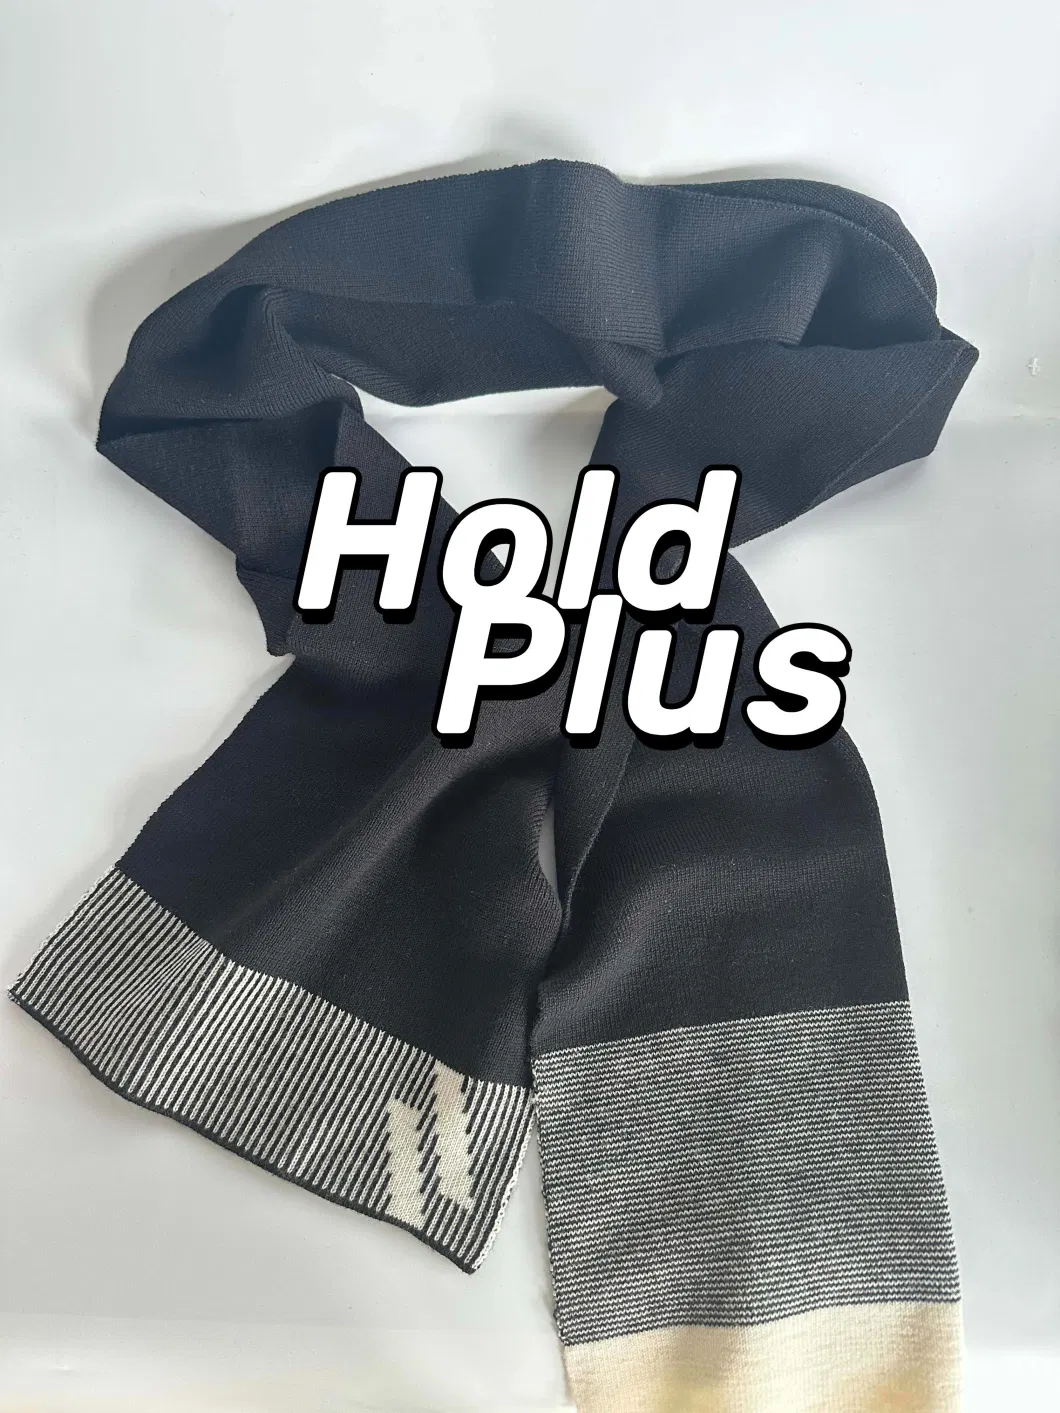 Hold Plus Wool Acrylic Cotton Scarves Black and White Simple Fashion